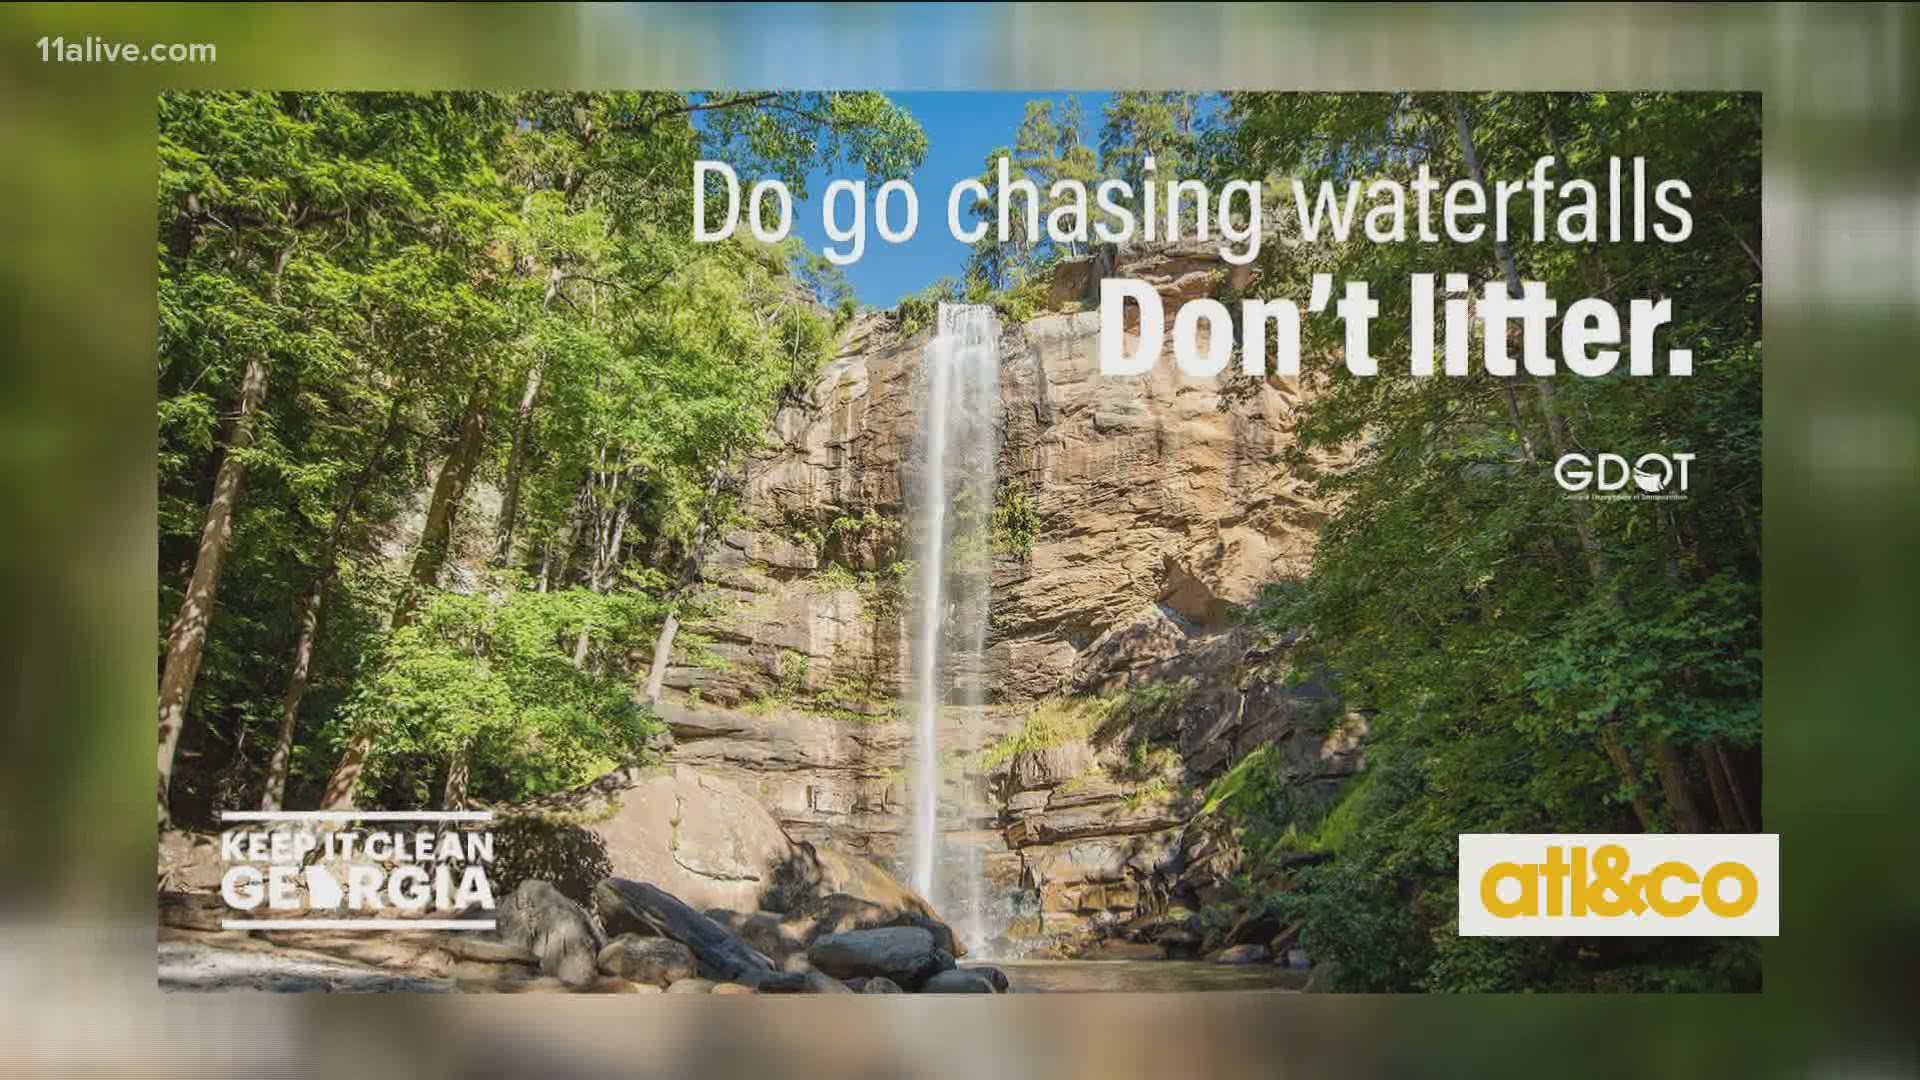 Georgia Department of Transportation's 'Keep It Clean Georgia' campaign is intended to motivate Georgians to take an active role in preserving our state's beauty.